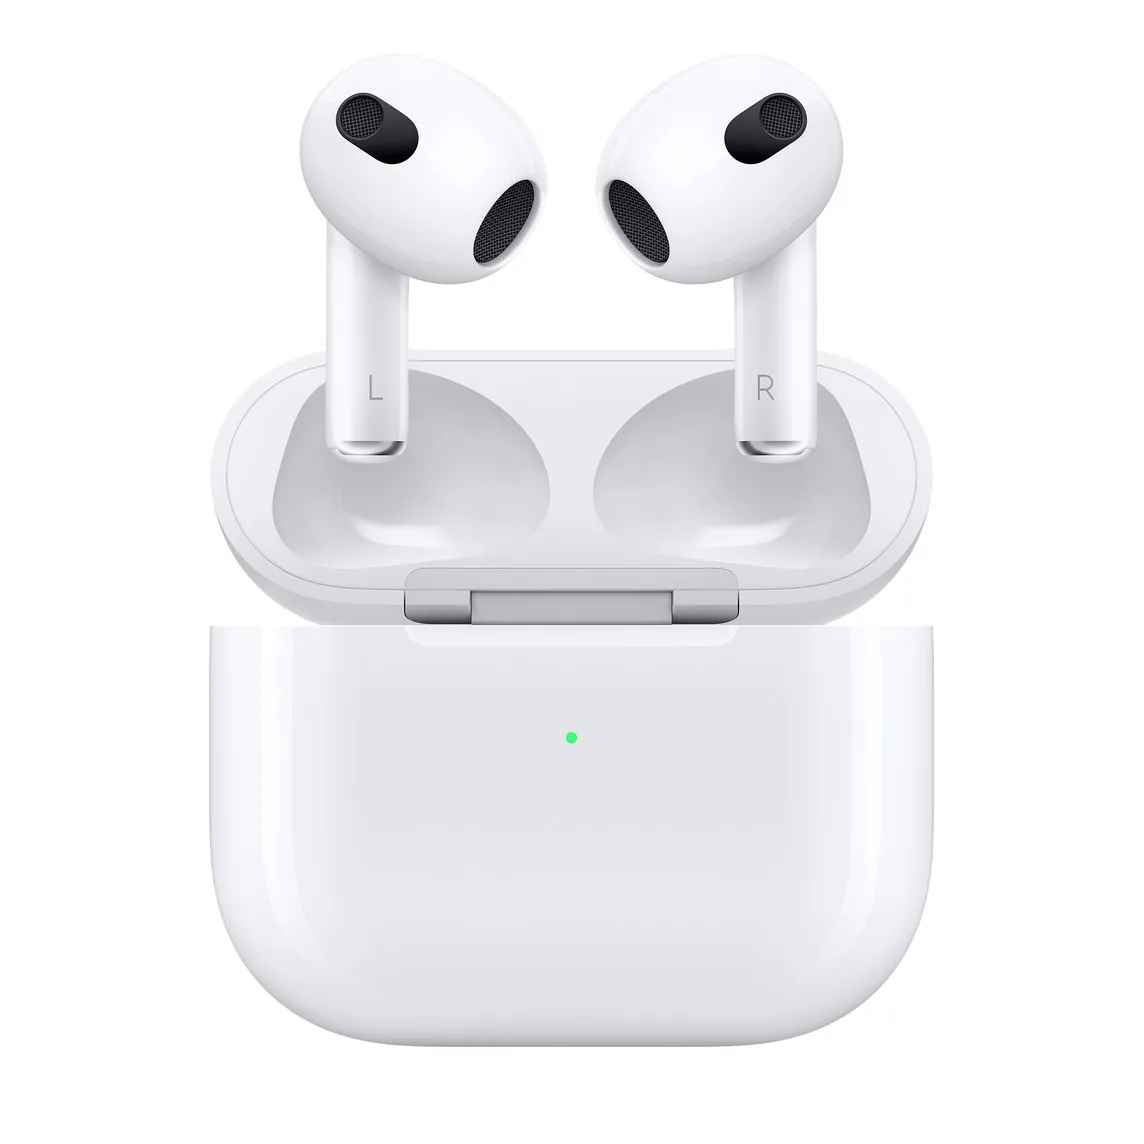 

Apple AirPods 3rd Wireless Earbuds with Lightning Charging Case H1 chip Spatial Audio Up to 30 Hours of Battery Life for iPhone